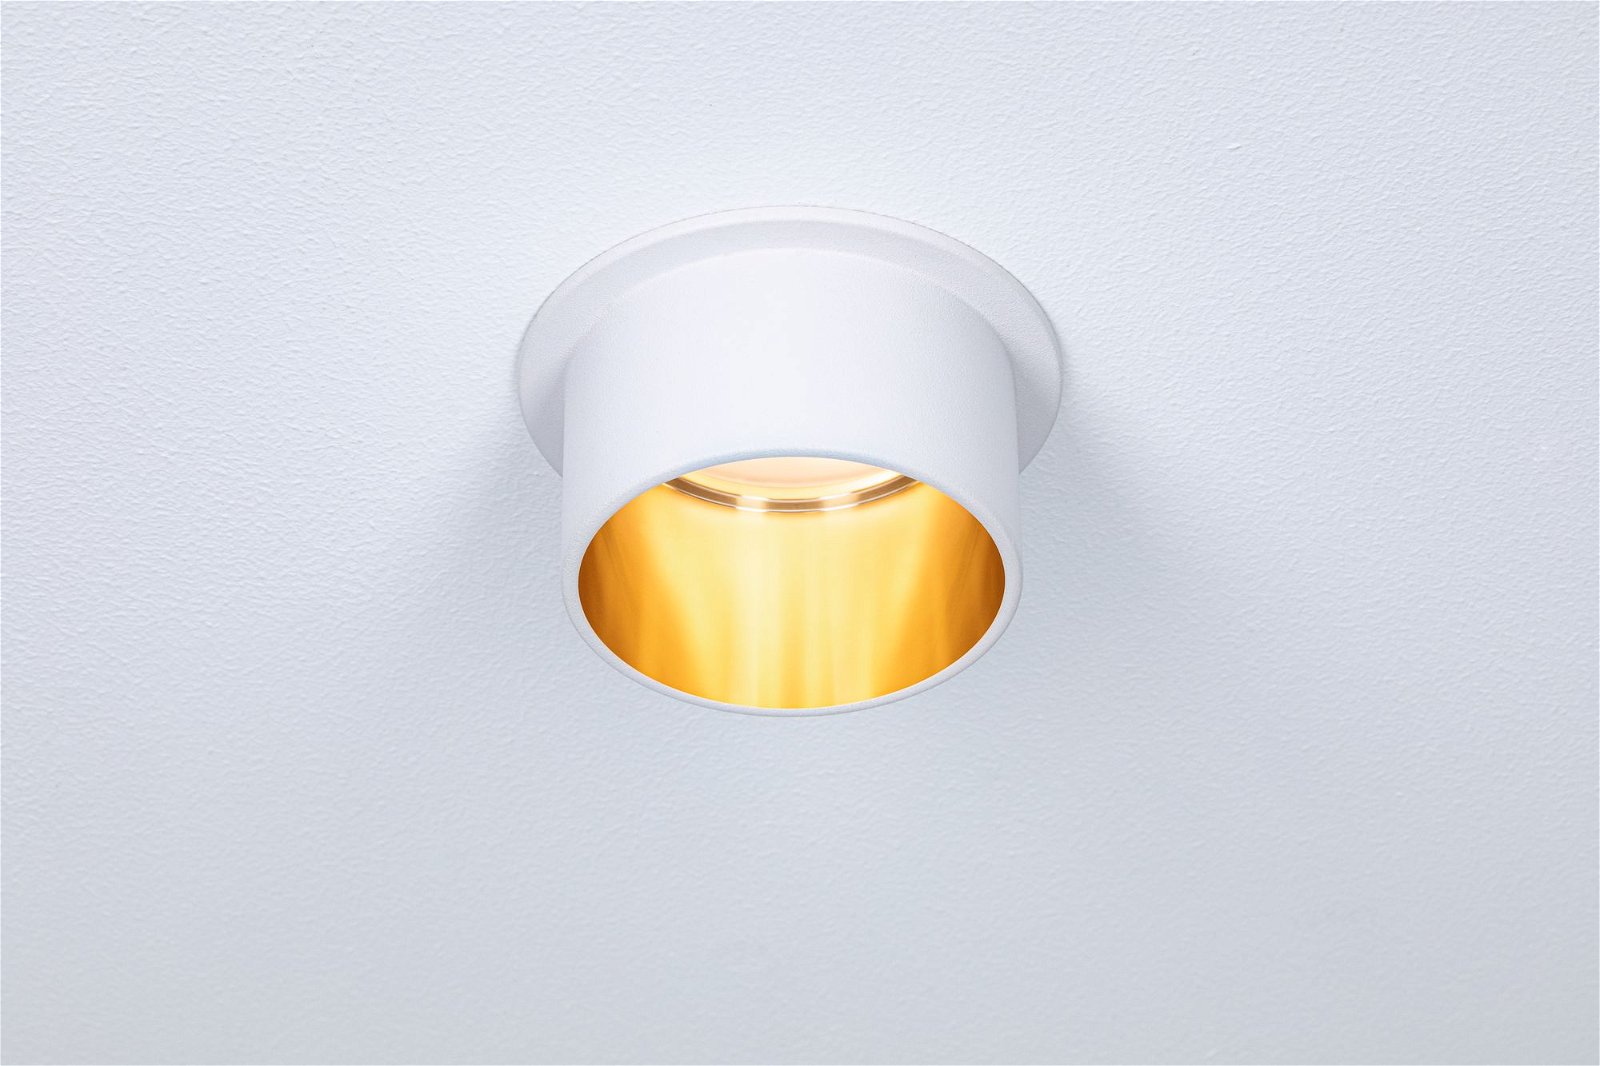 LED Recessed luminaire 3-Step-Dim Gil Coin IP44 round 68mm Coin 6W 470lm 230V dimmable 2700K Matt white/Gold